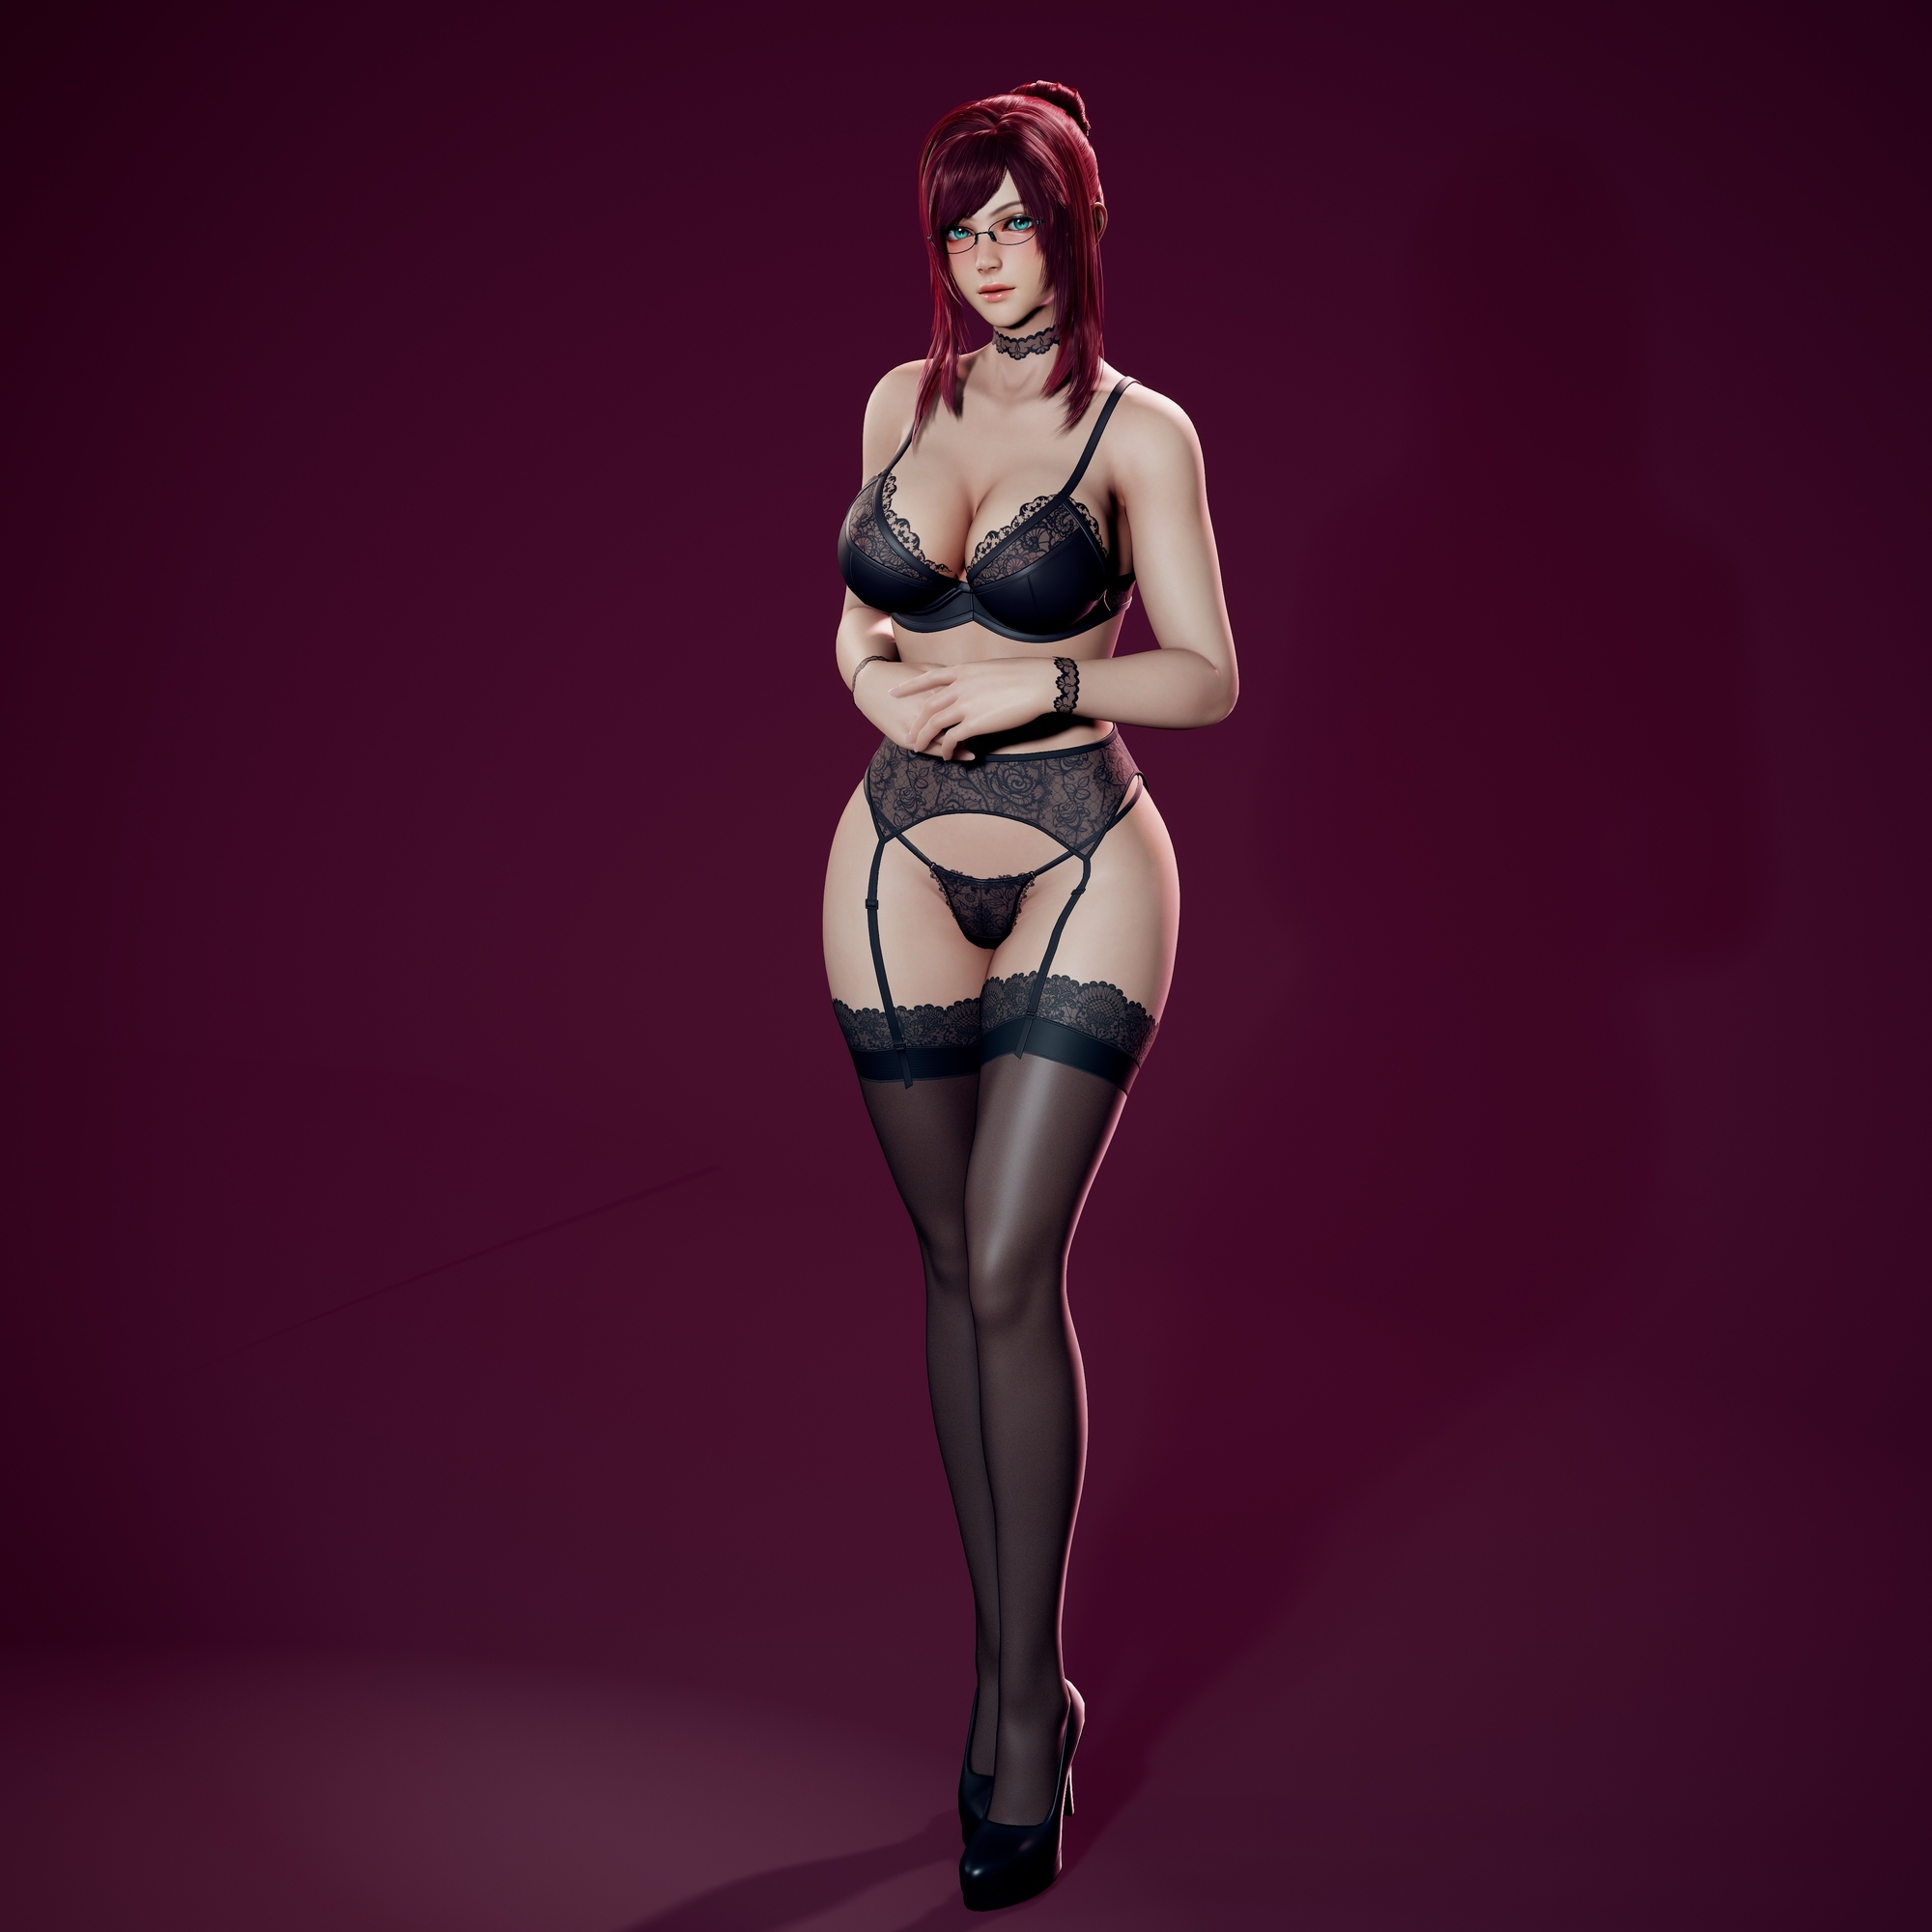 Primrose in lingerie. Getting ready for Valentine League Of Legends Primrose Model Big Tits Sexy Lingerie High Heels Thong 4